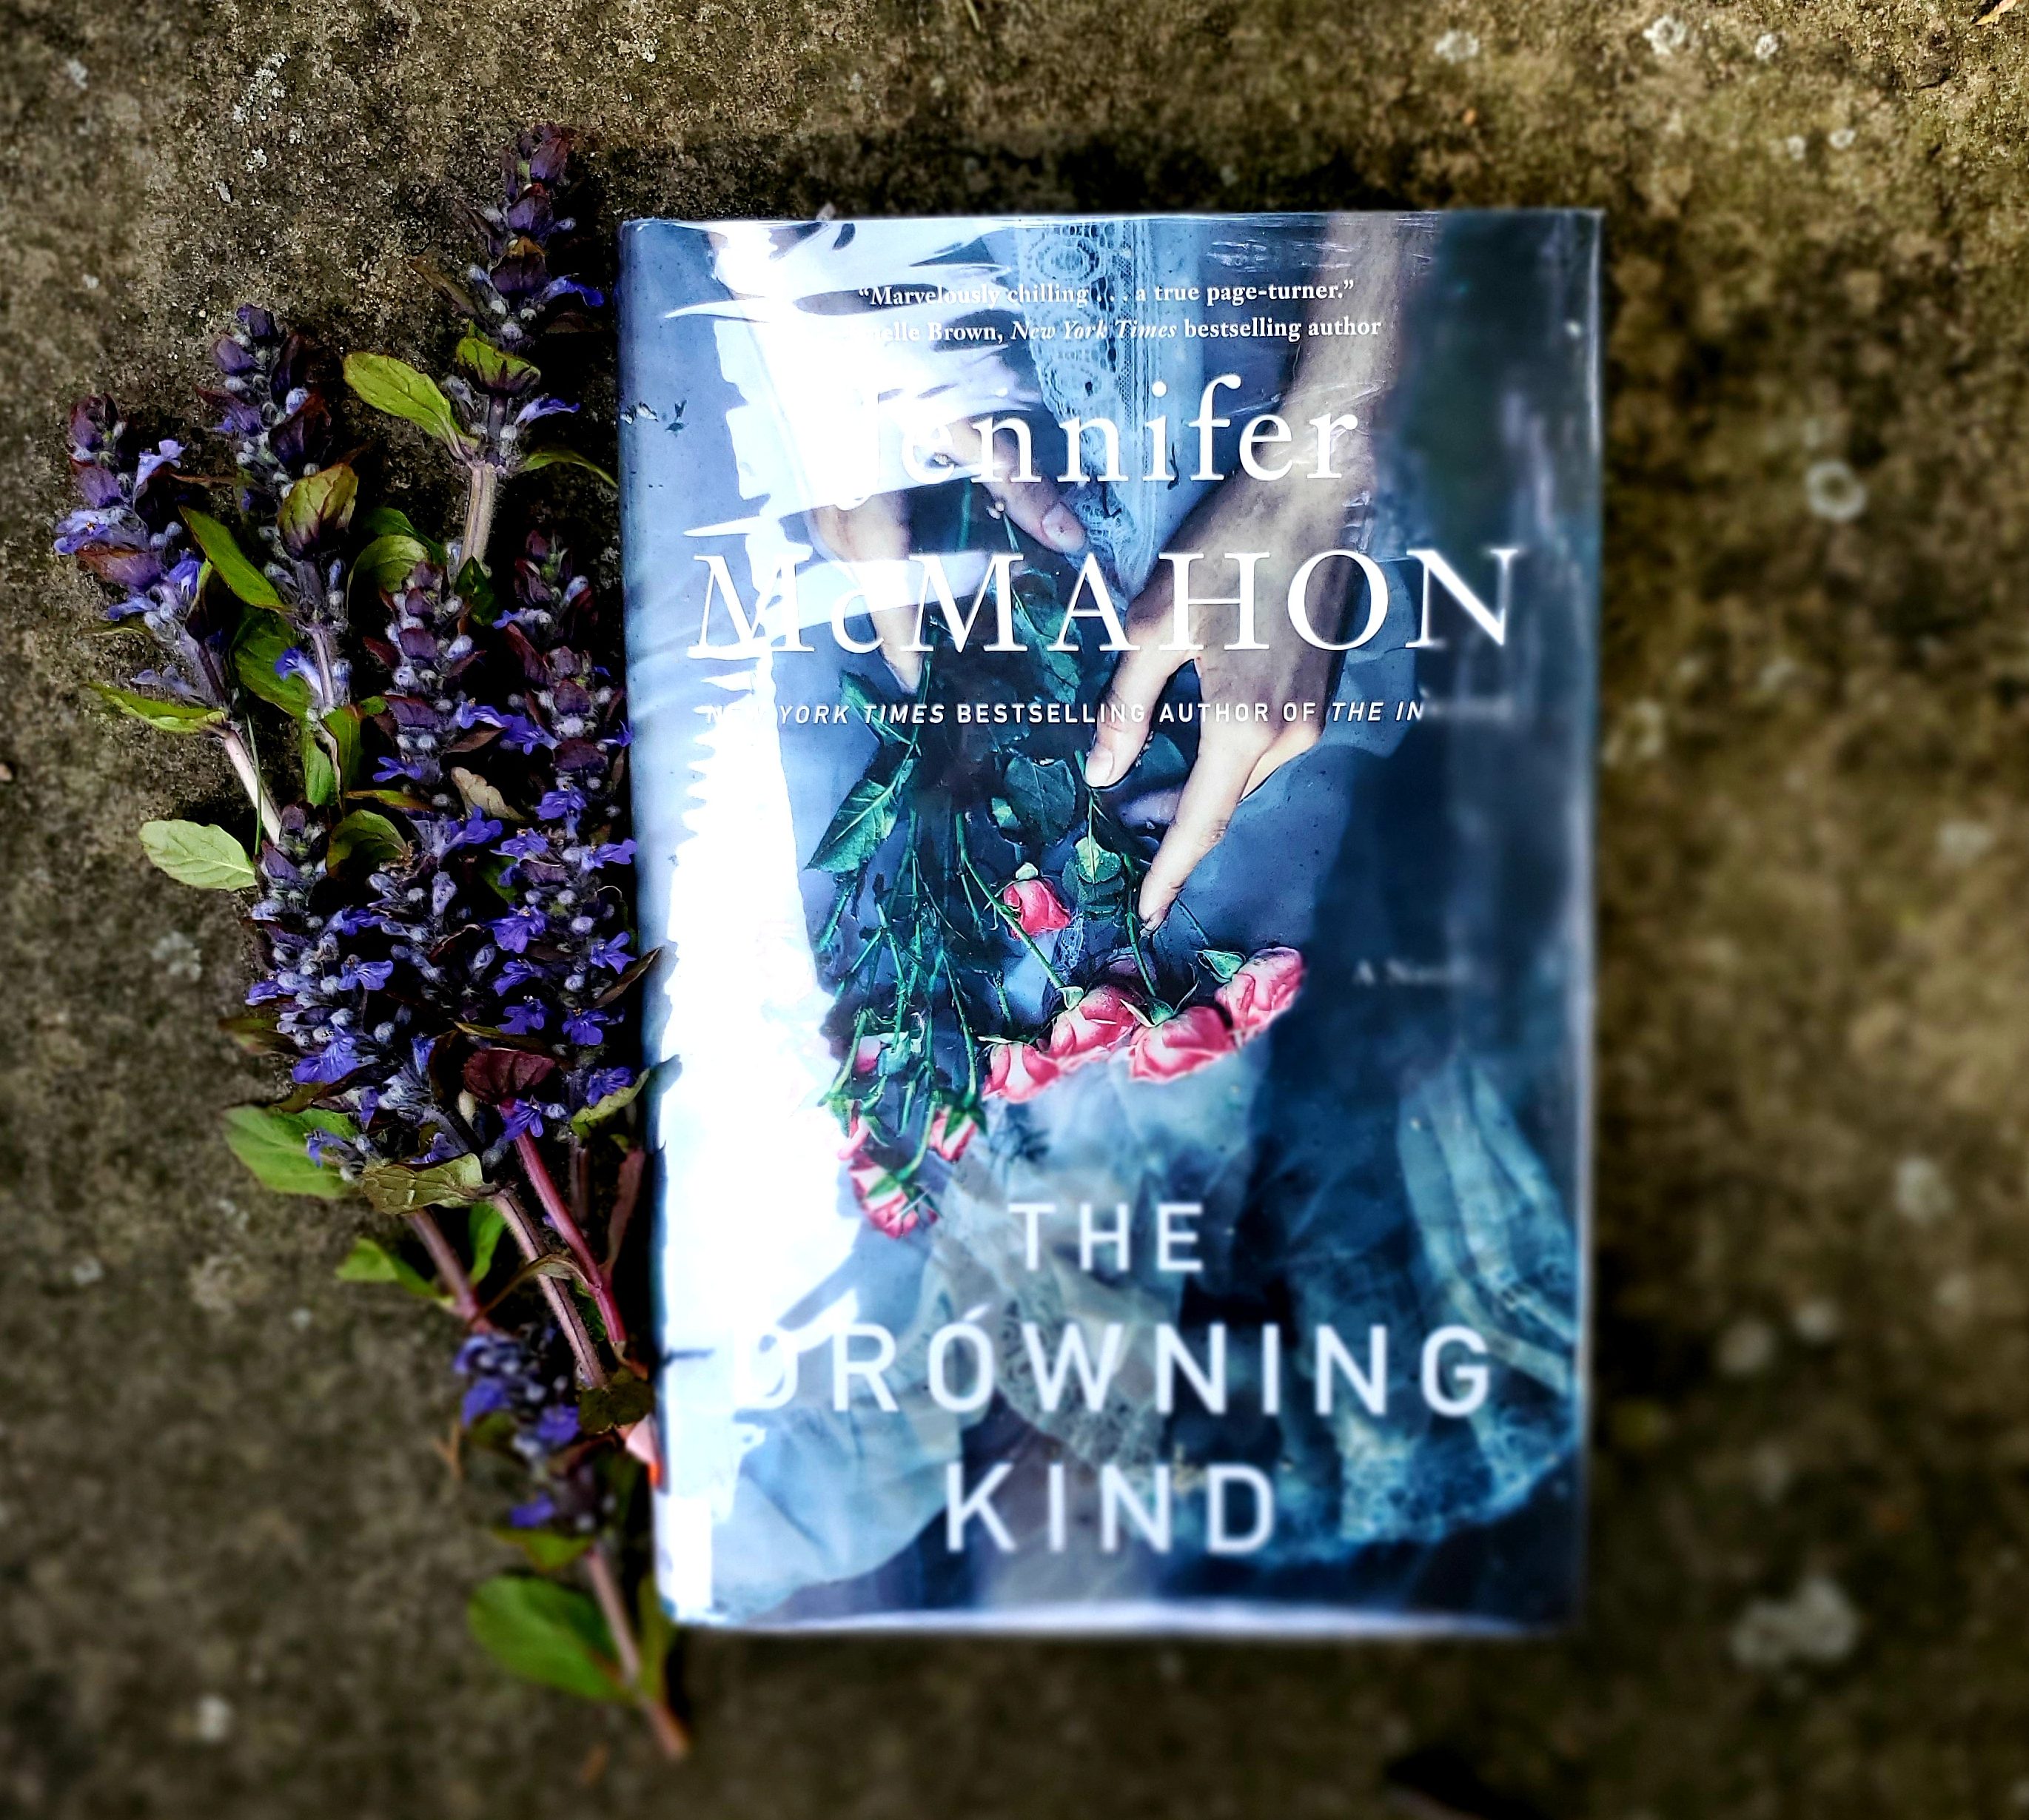 Book Review of THE DROWNING KIND